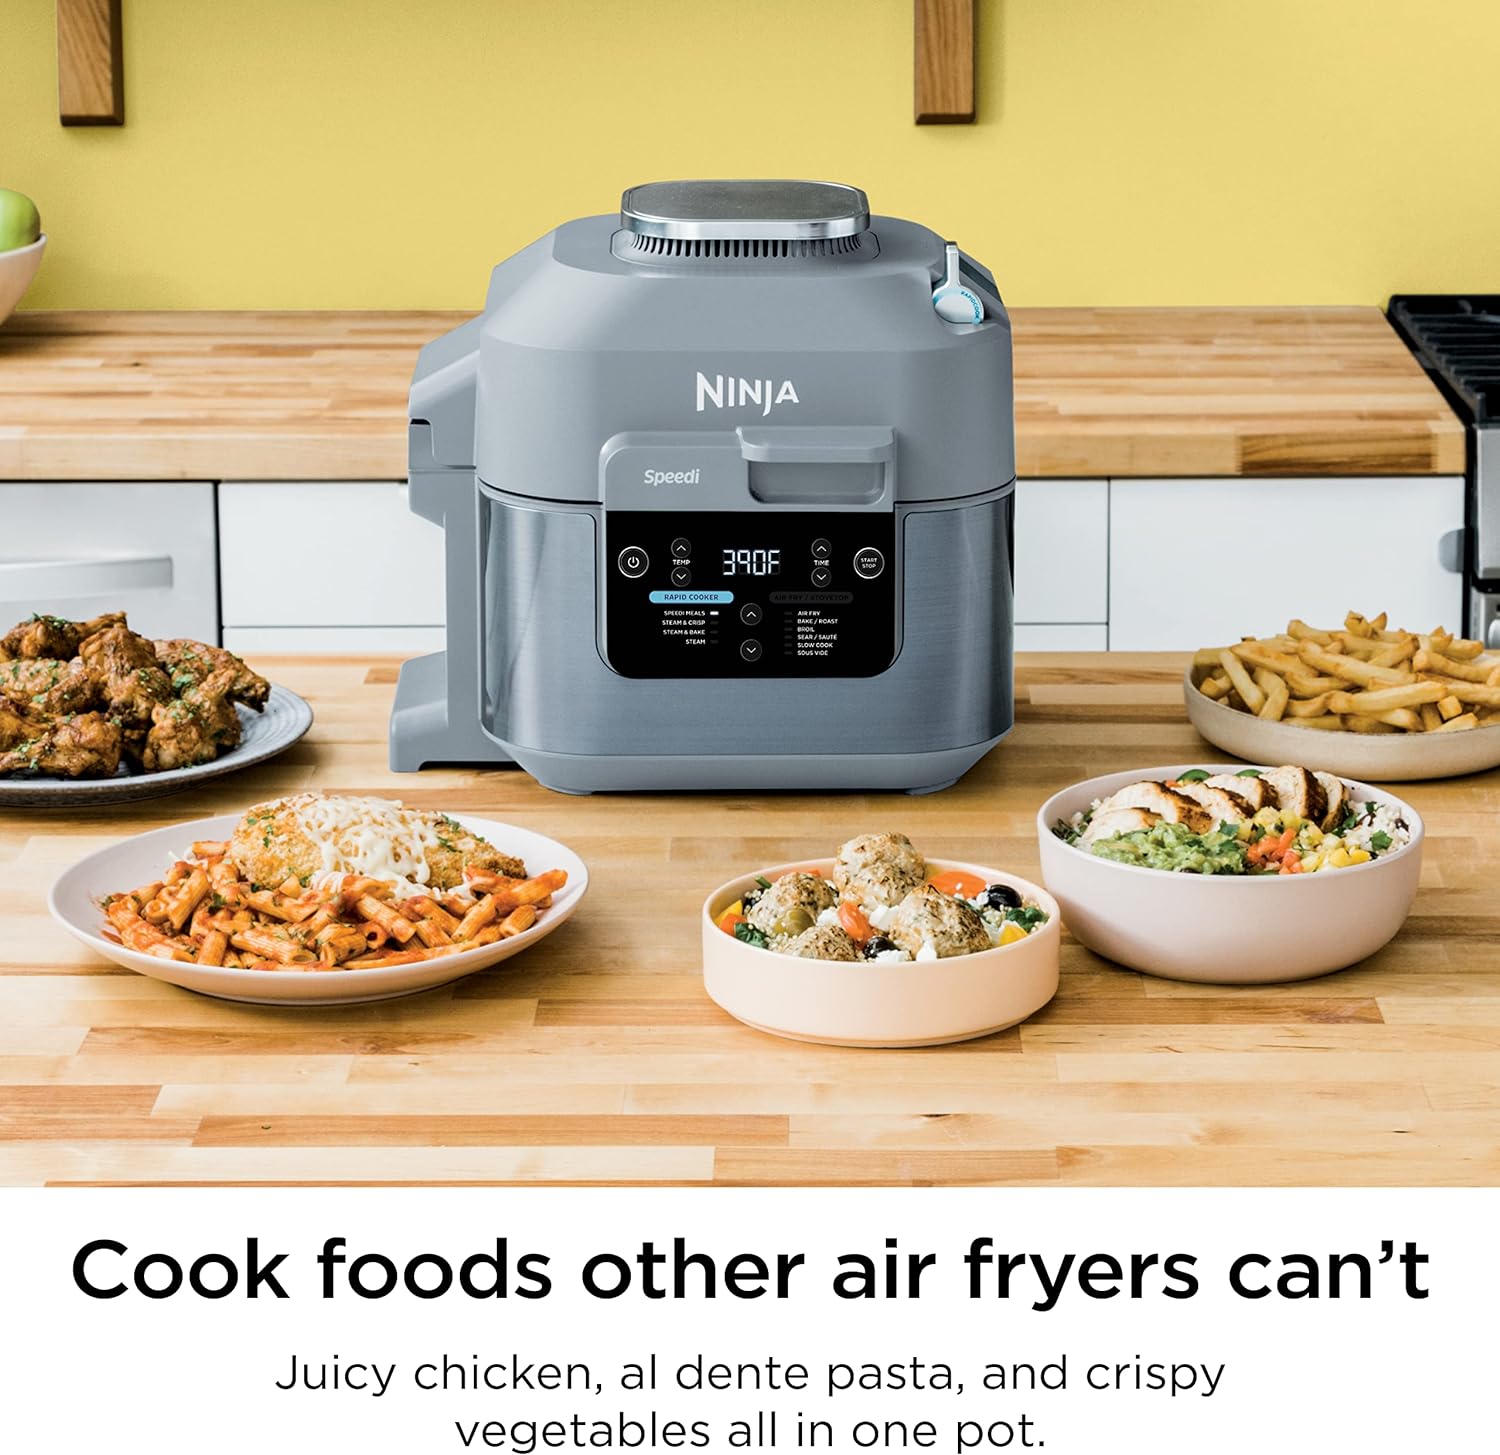 Rapid Cooker Air Fryer 6-qt. Capacity 10-in-1 Functionality Meal Maker Sea Salt Gray Grey Stainless Steel